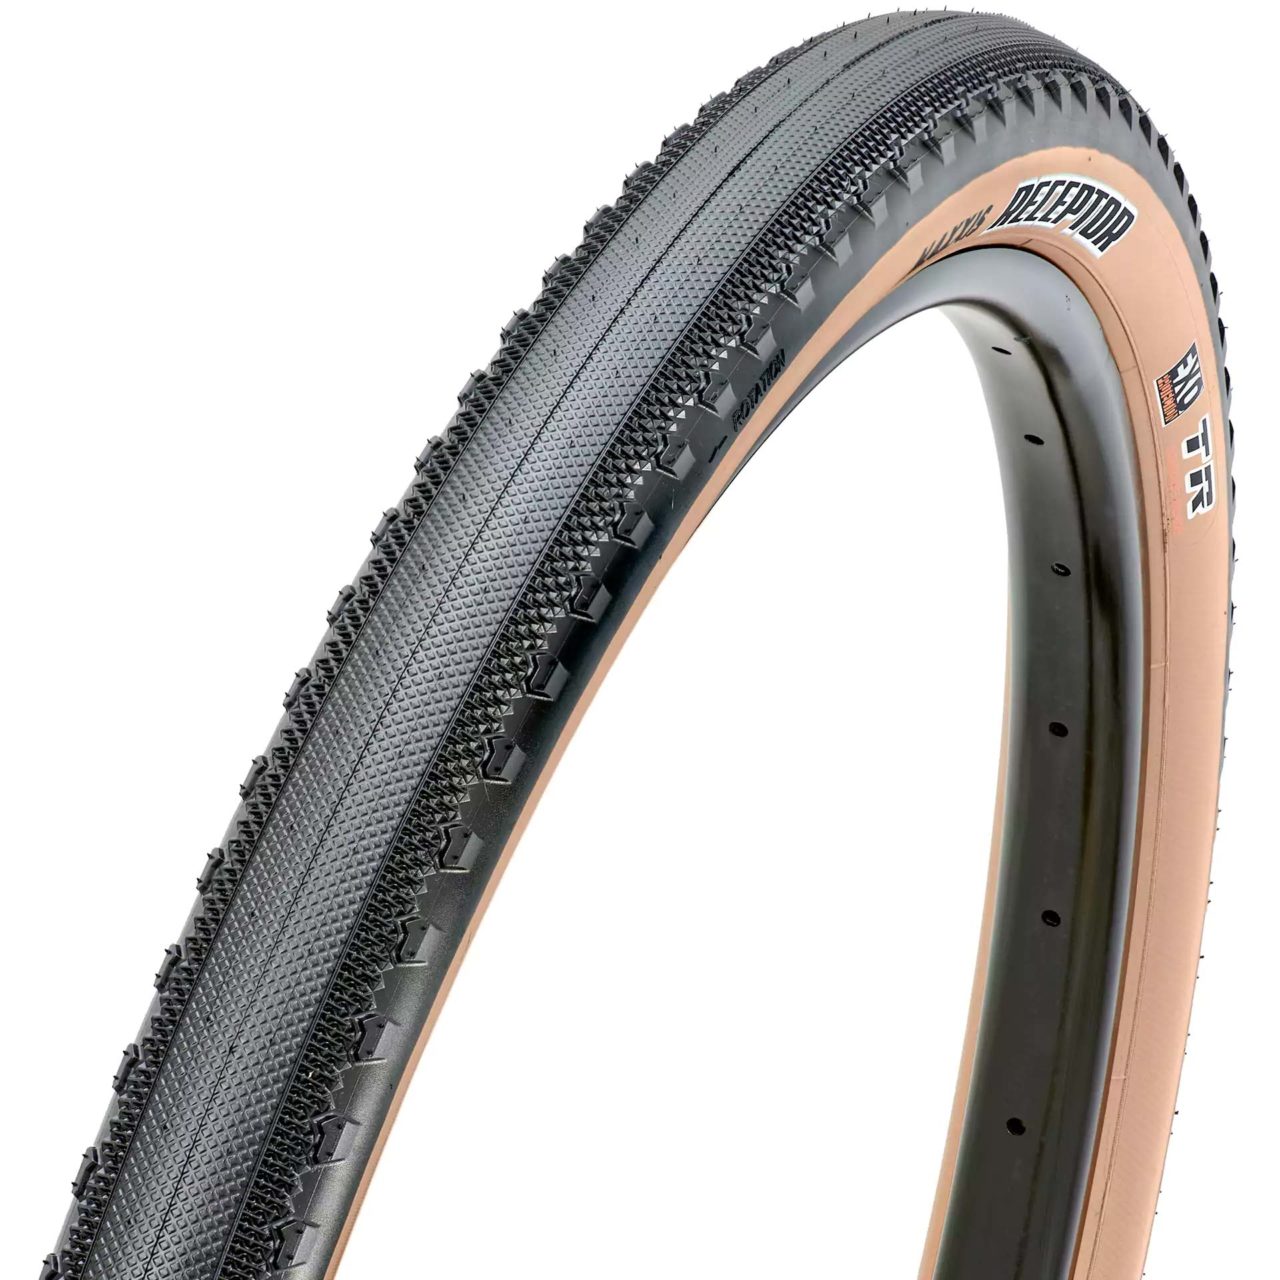 Maxxis Receptor bicycle tire with tan sidewall.